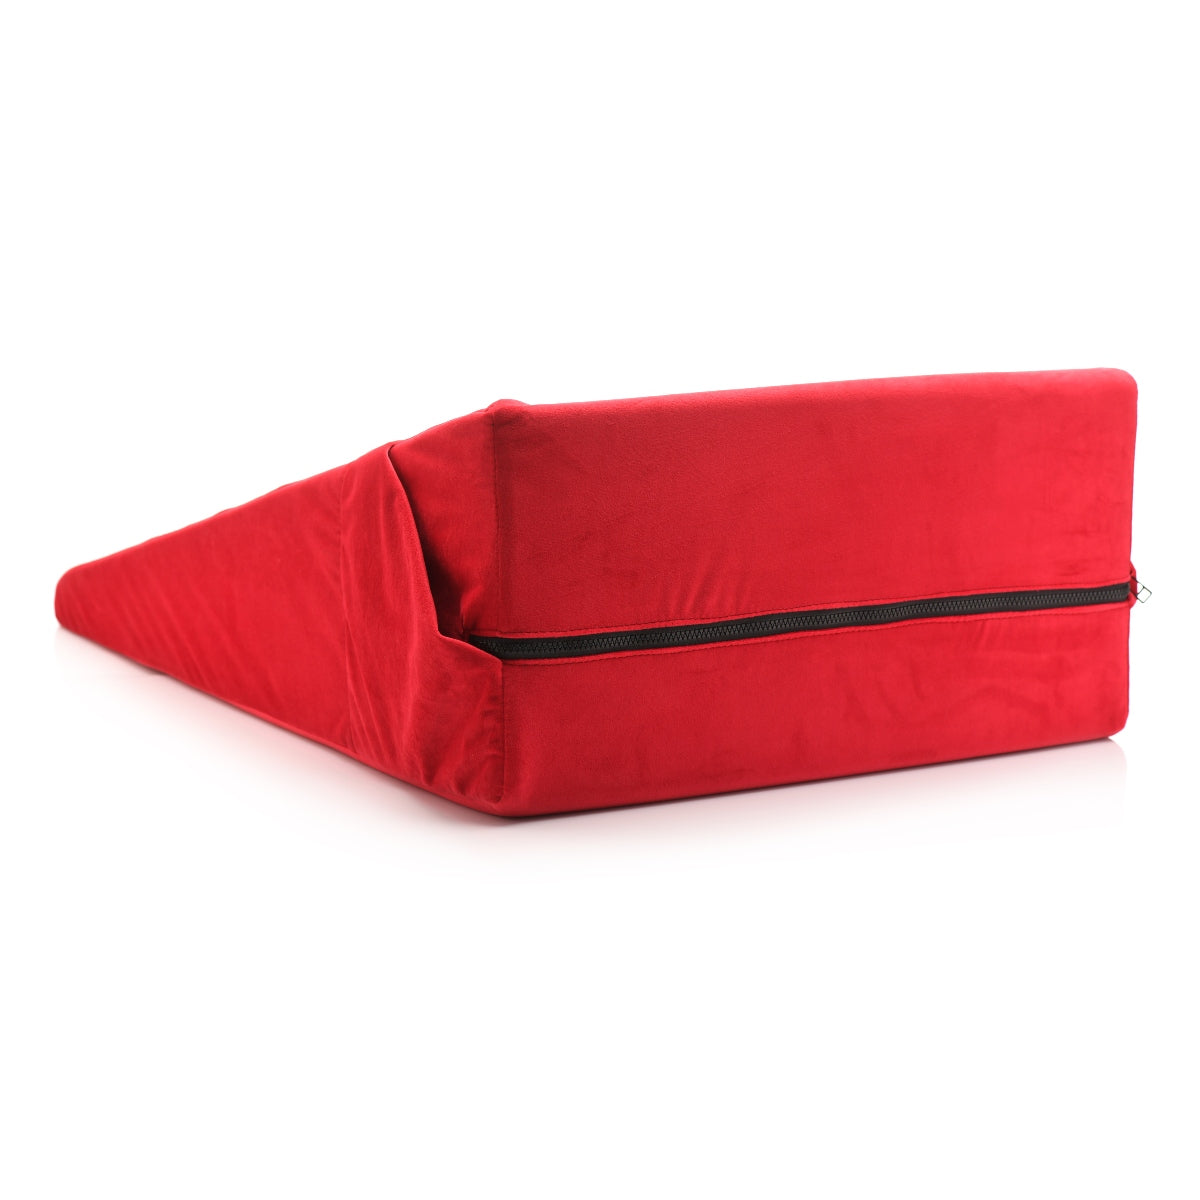 Bedroom Bliss | XL Love Cushion Red